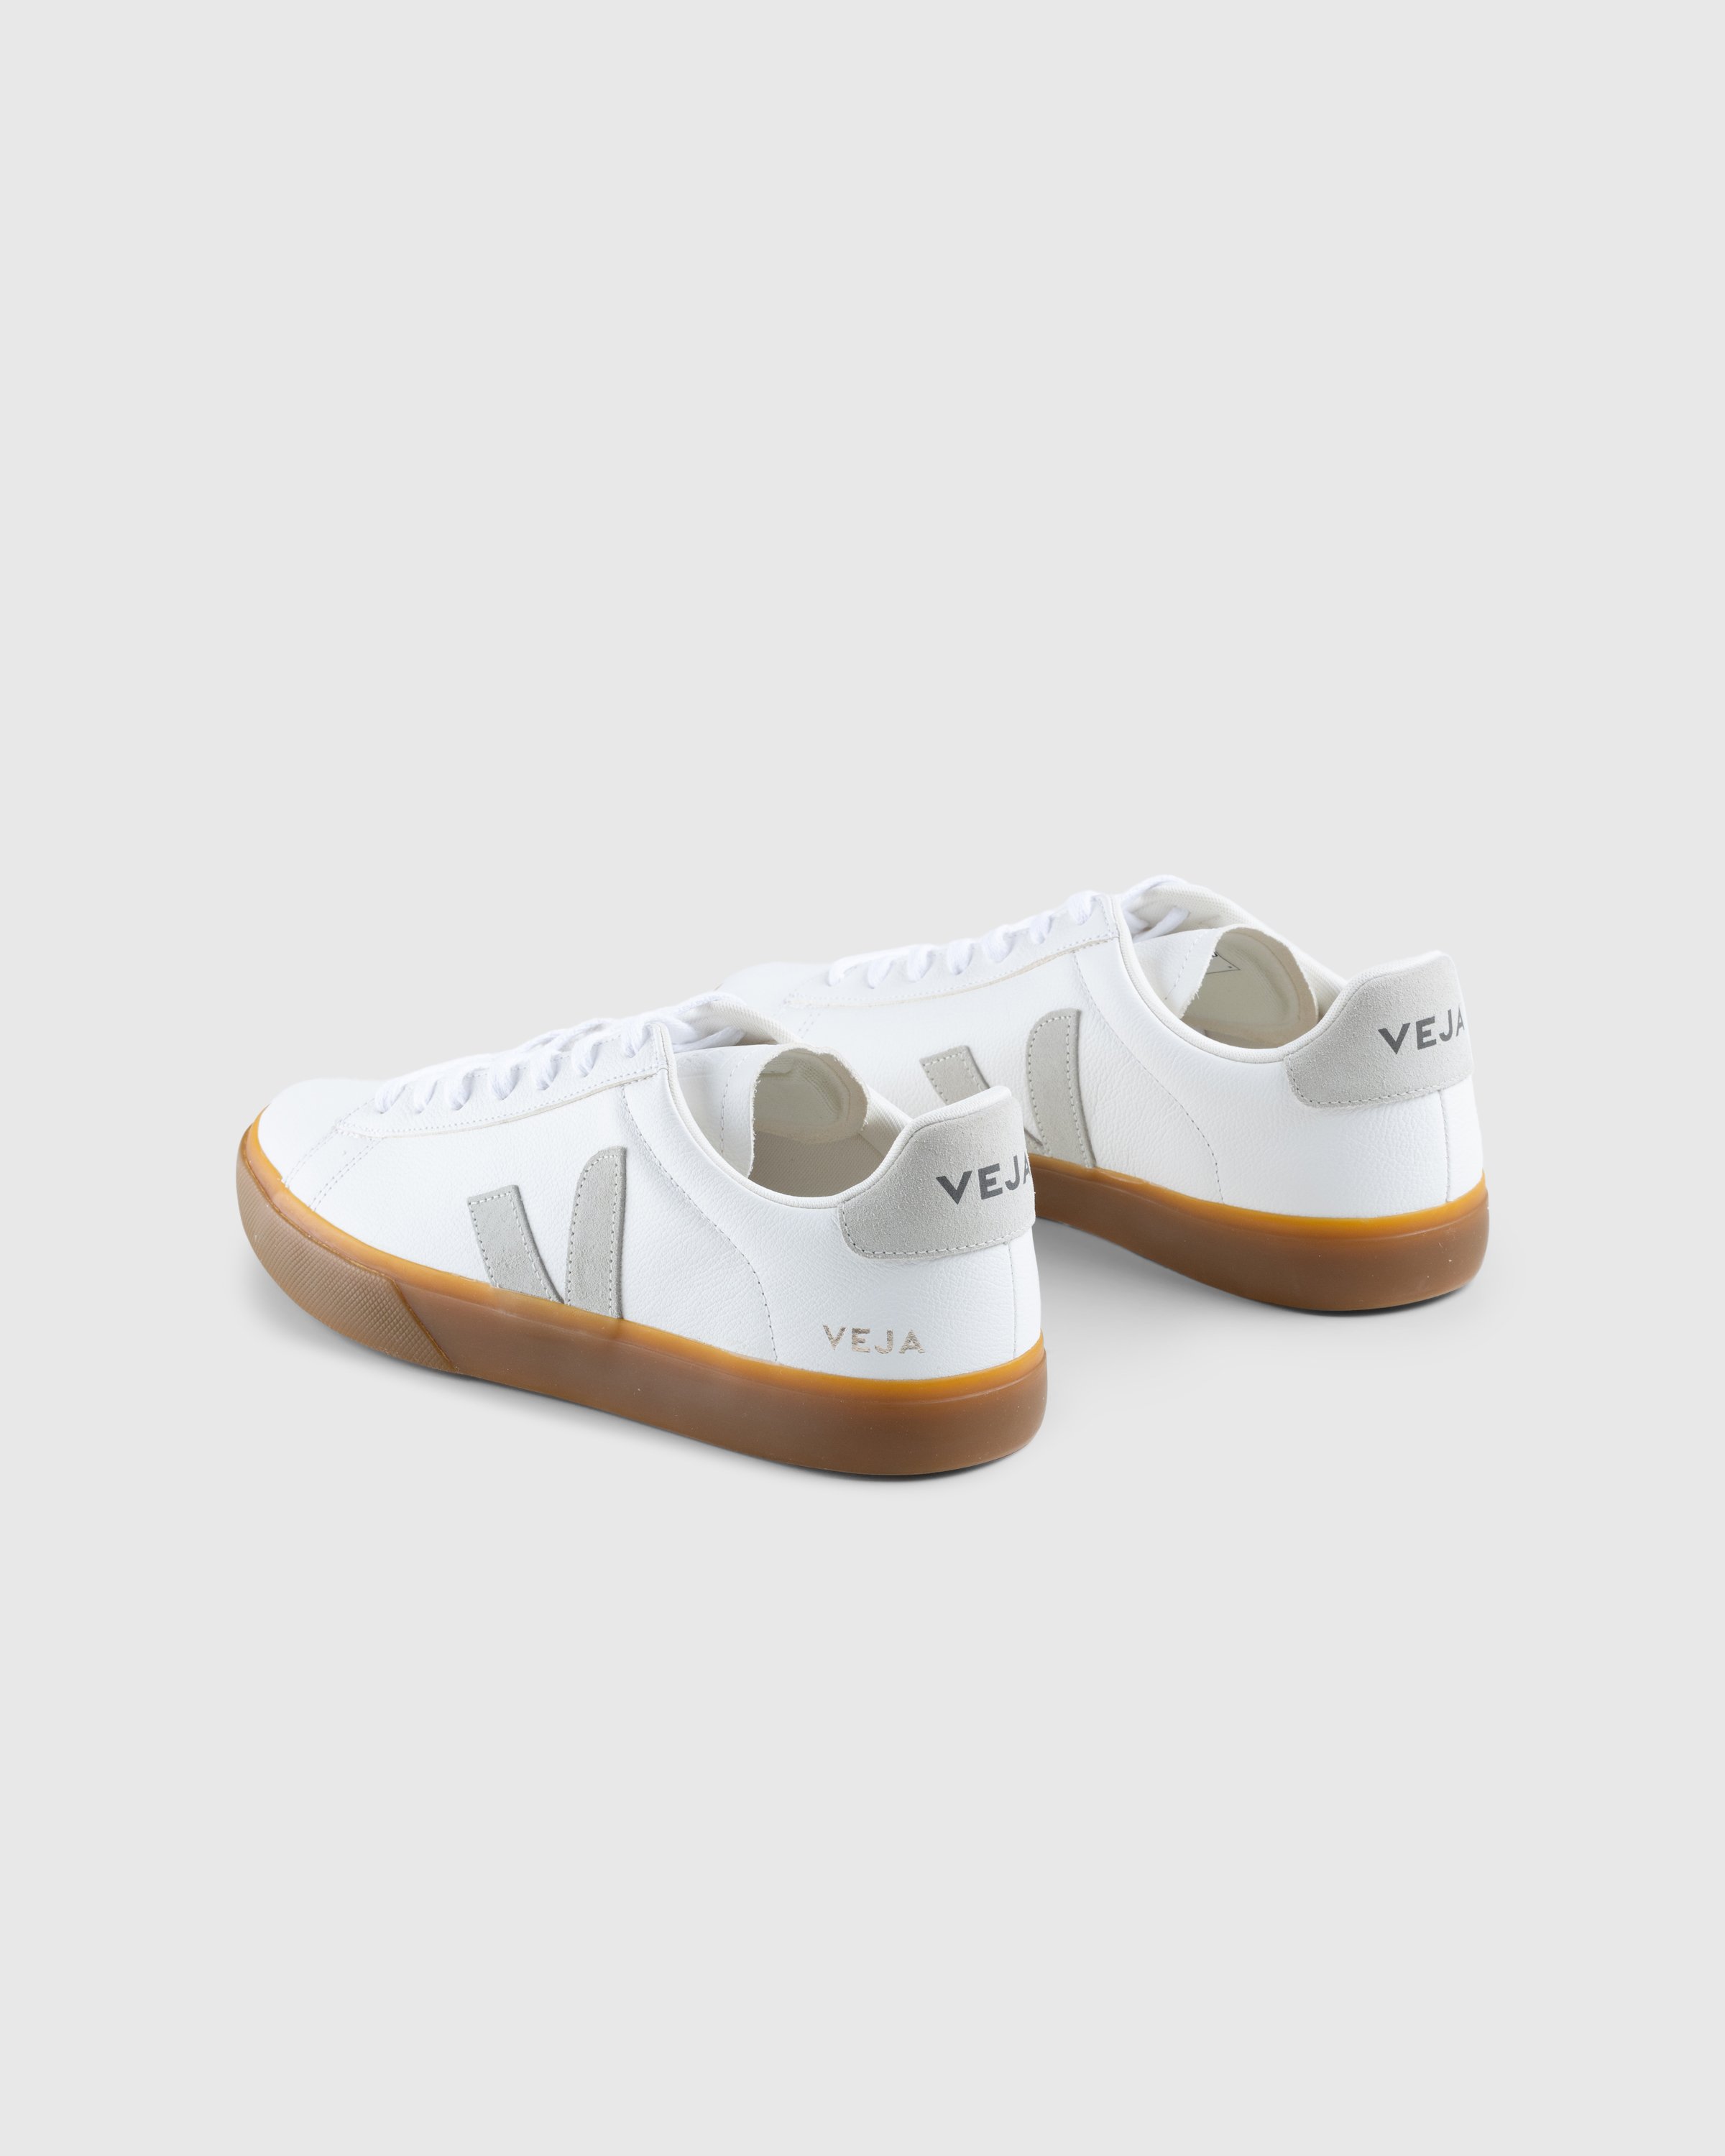 VEJA - Campo White/Natural - Footwear - White - Image 4